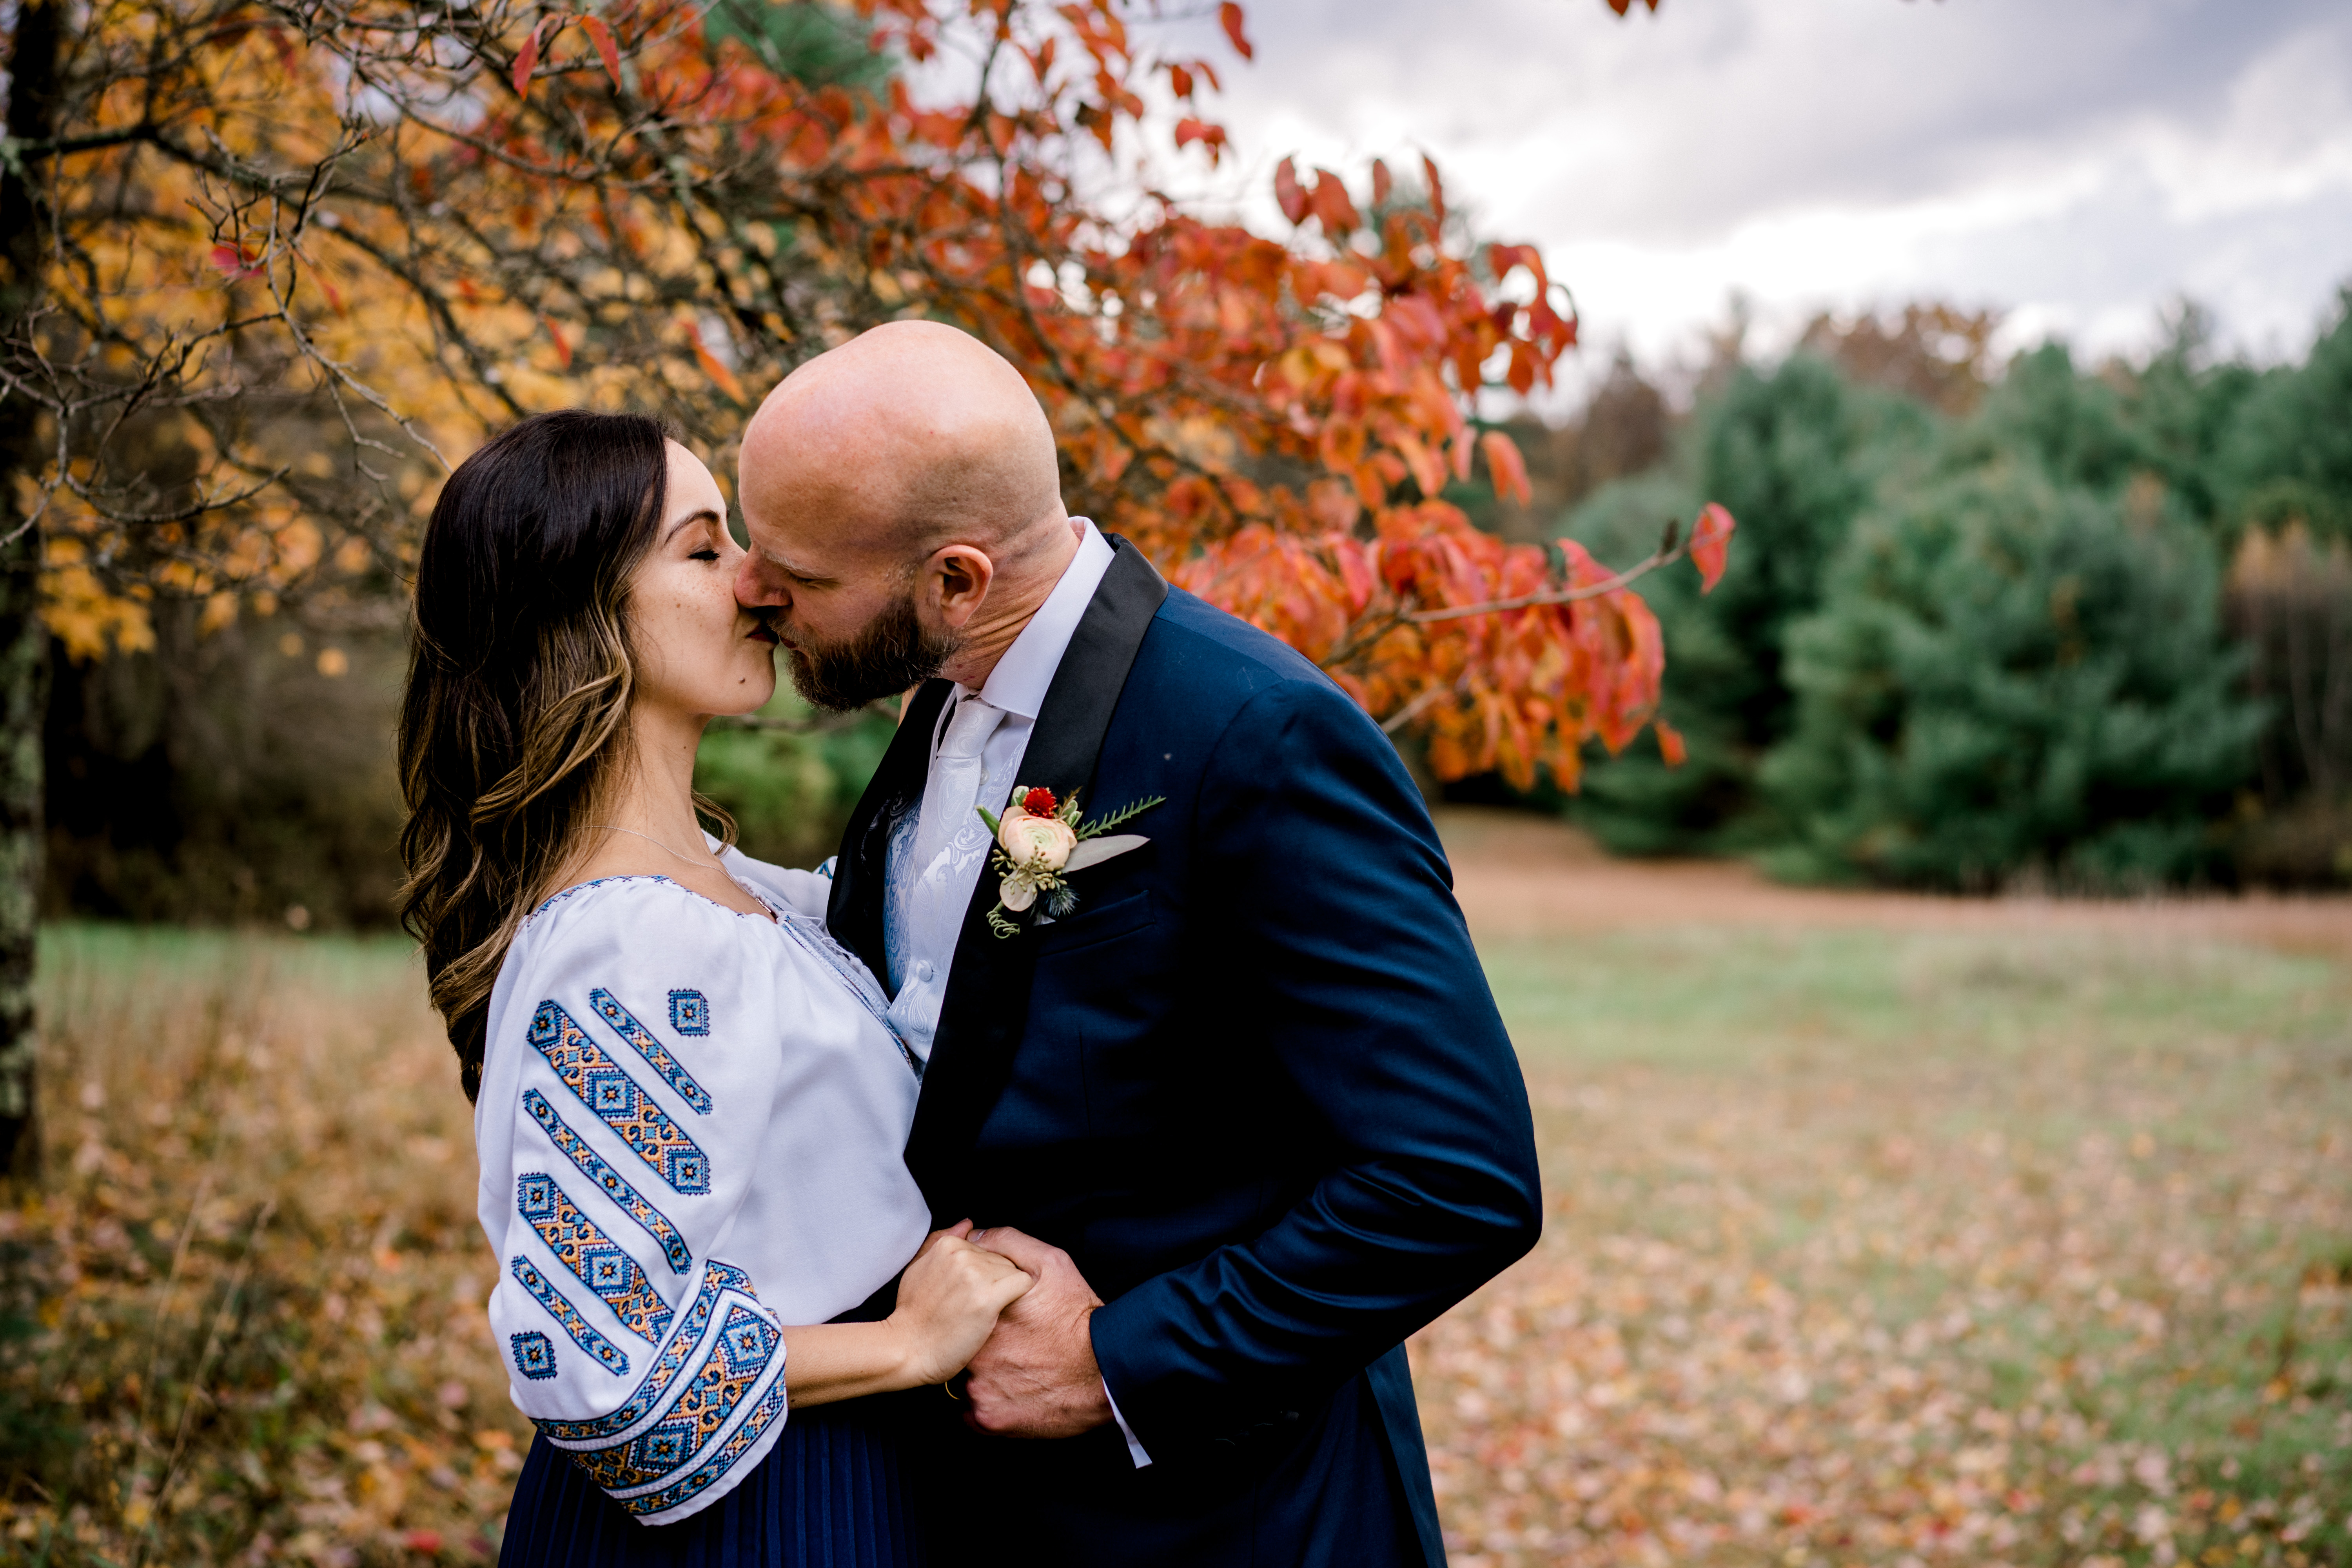 MountainView Manor Elopement | Glen Spey NY | Carroll Tice Photography